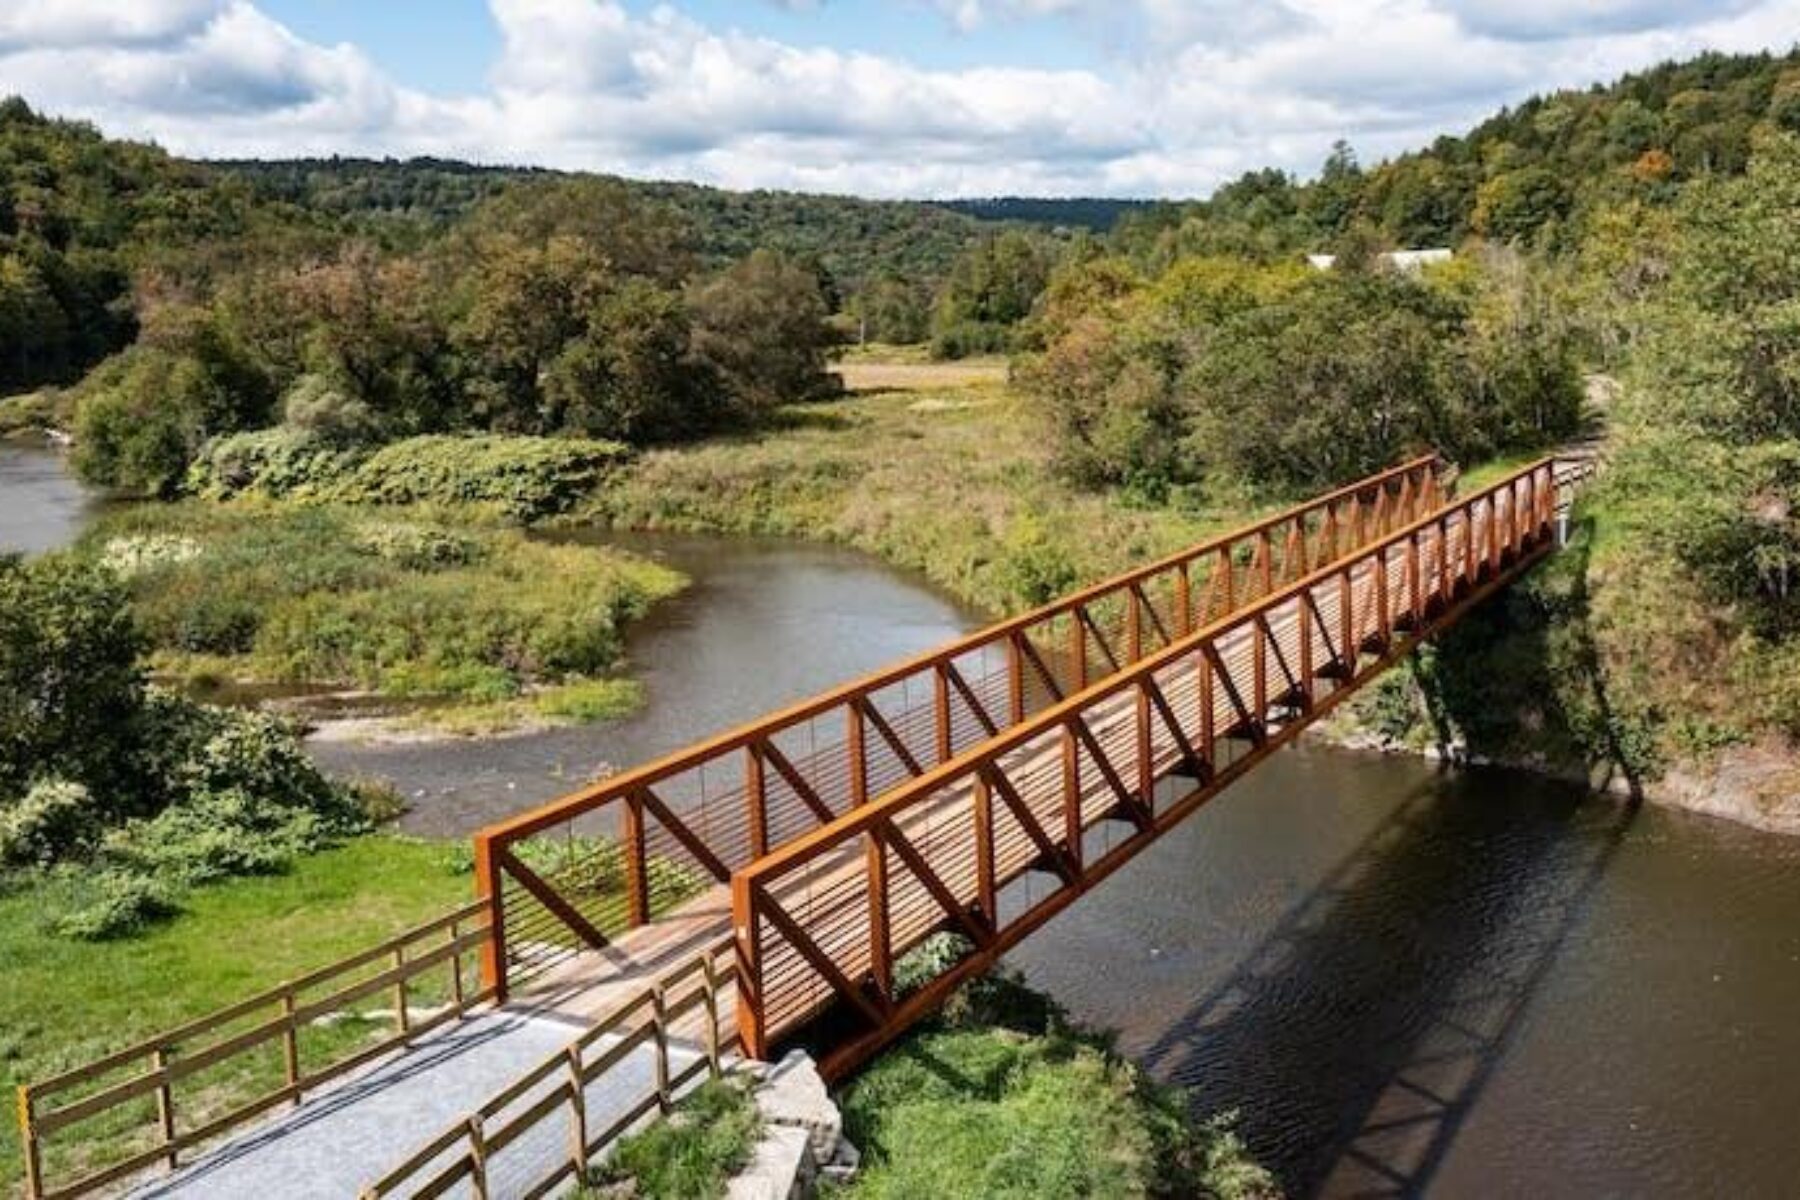 Lamoille Valley Rail Trail in Wolcott, Vermont | Photo courtesy Vermont Agency of Transportation